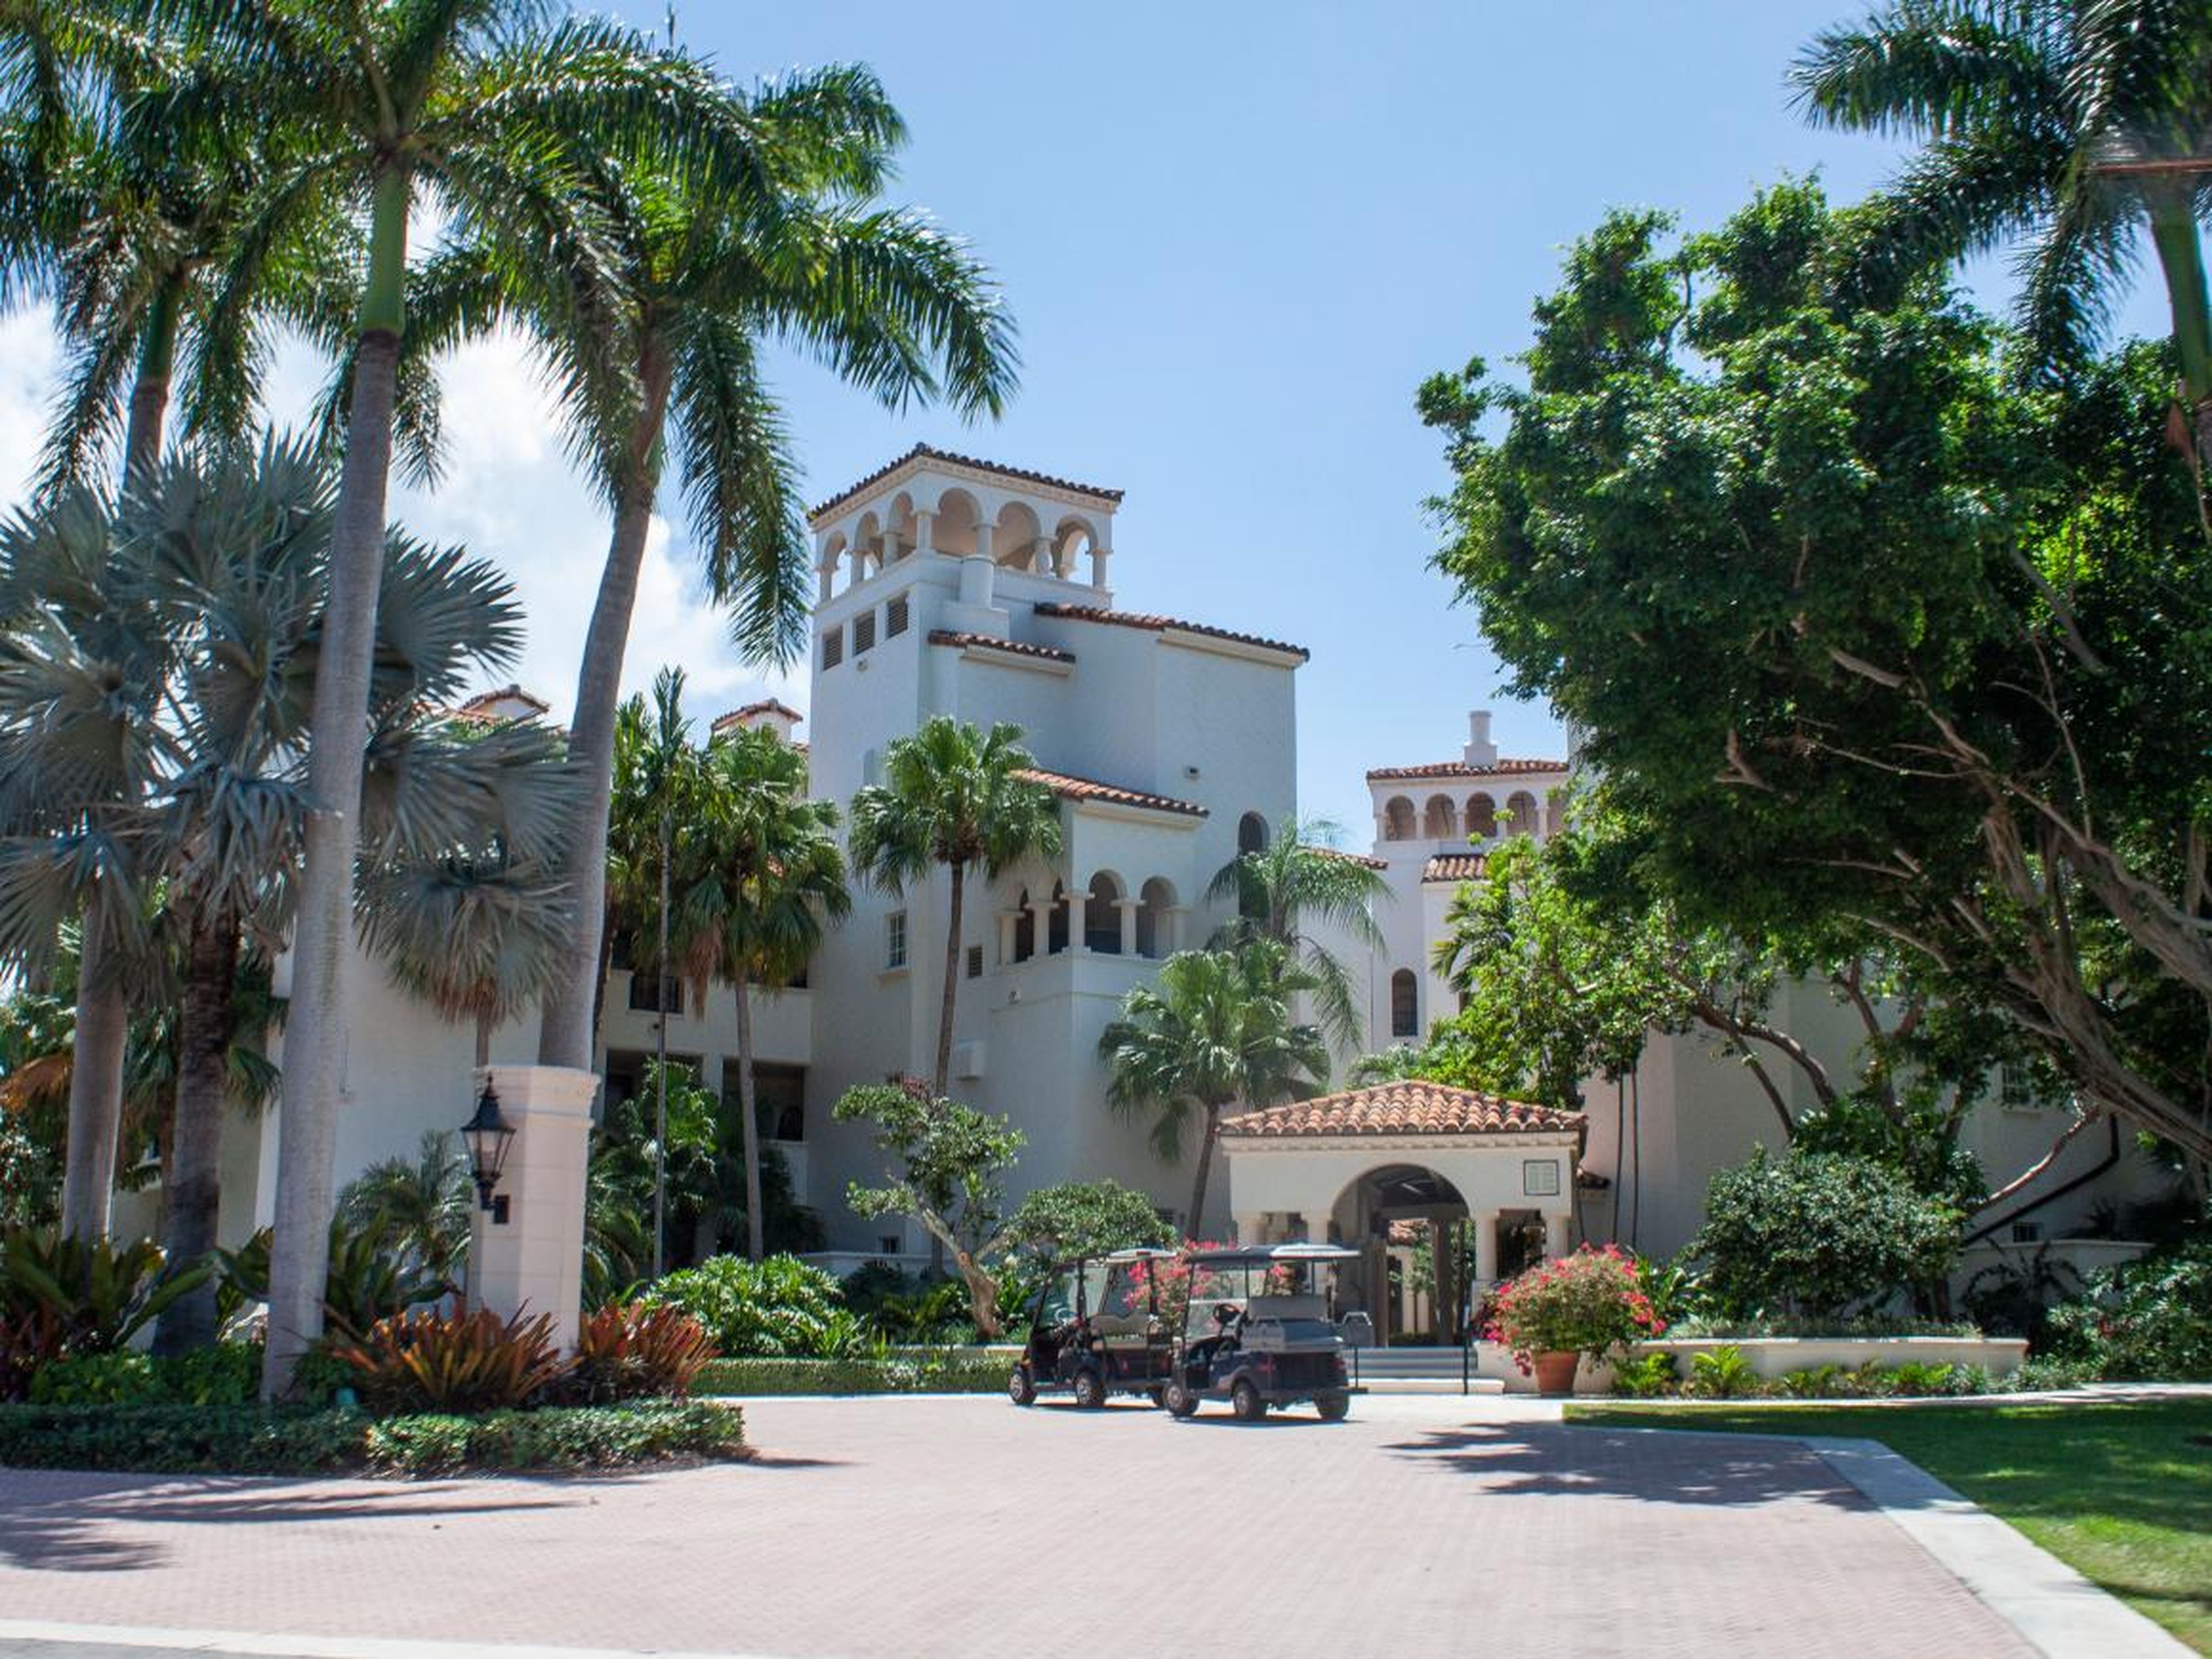 About 700 families live on Fisher Island, although only about 30% of those are year-round residents.